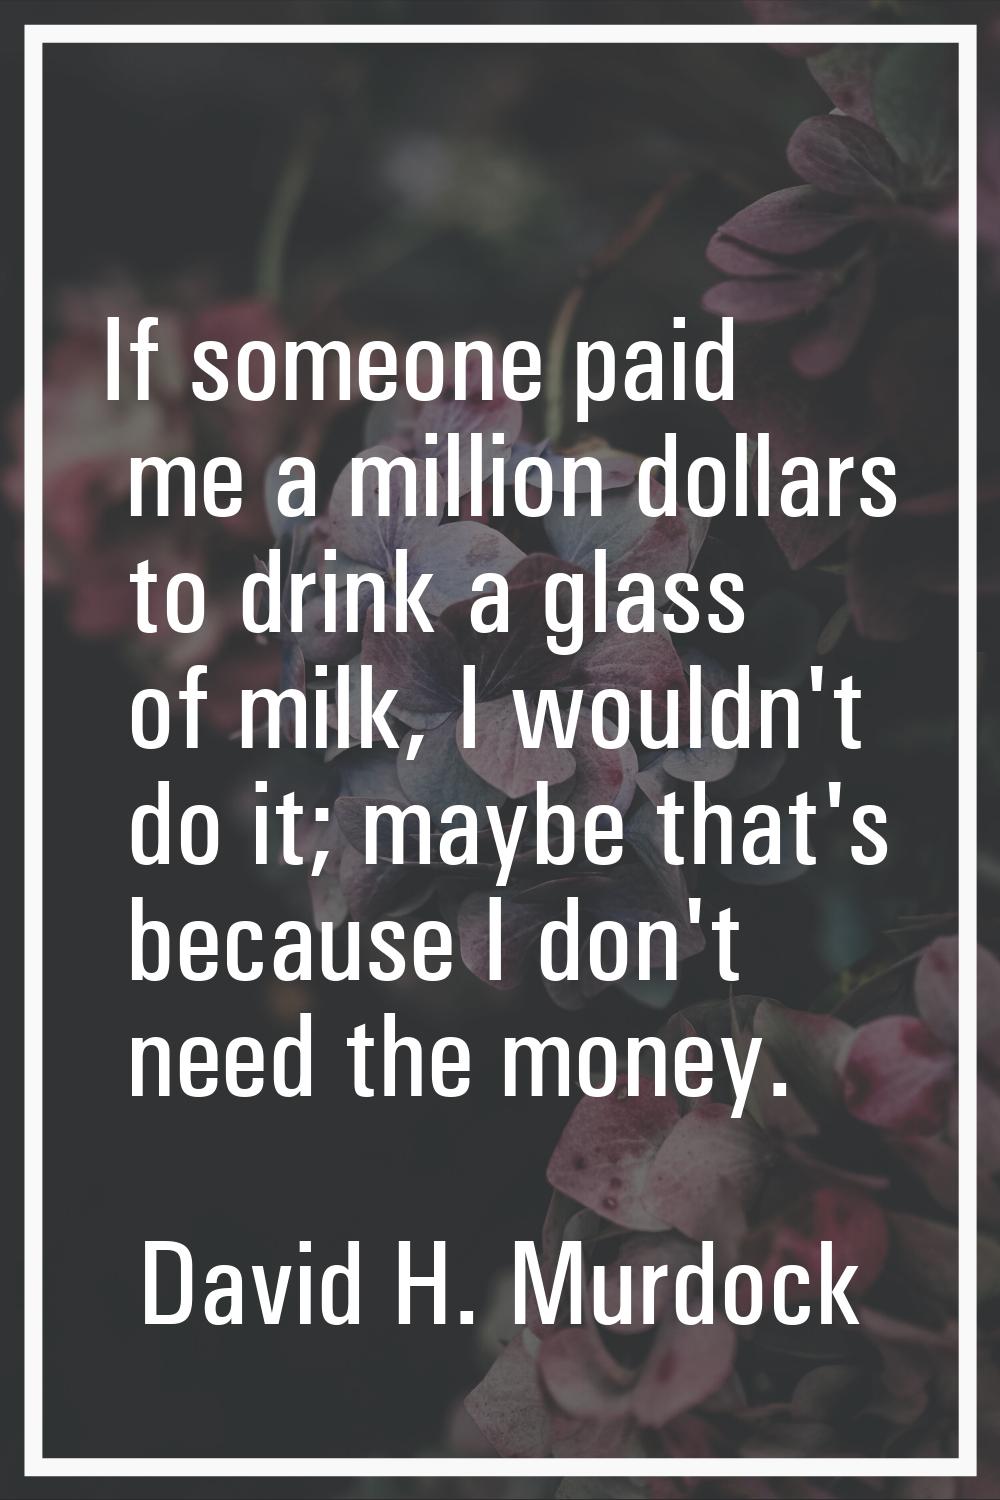 If someone paid me a million dollars to drink a glass of milk, I wouldn't do it; maybe that's becau